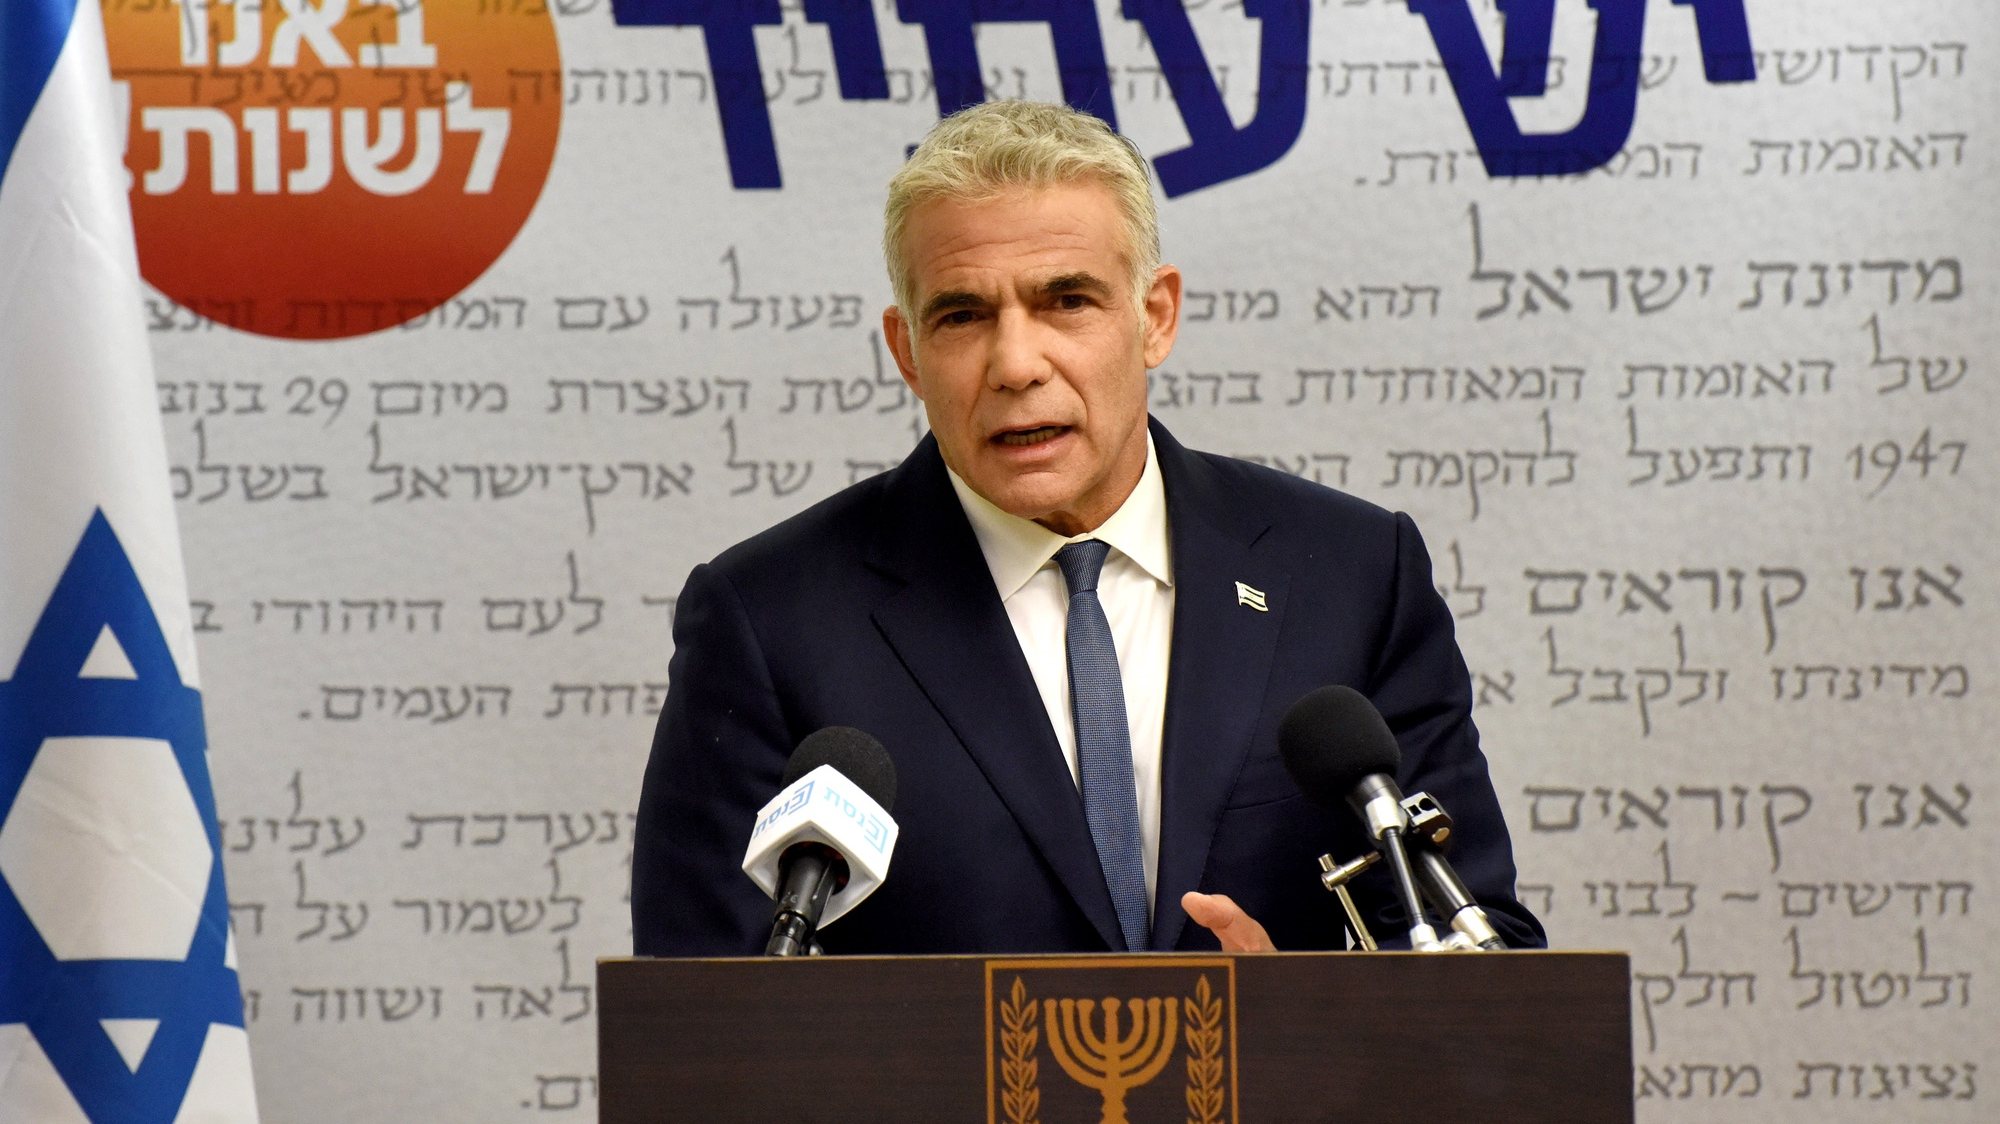 epa09238823 Chairman of the Yesh Atid Party, Yair Lapid, delivers a statement to the press in the Knesset, the Israeli Parliament, in Jerusalem, 31 May 2021. Leader of the Yemina party Bennett on 30 May announced he will form a coalition government with Yair Lapid&#039;s Yesh Atid.  EPA/DEBBIE HILL / POOL